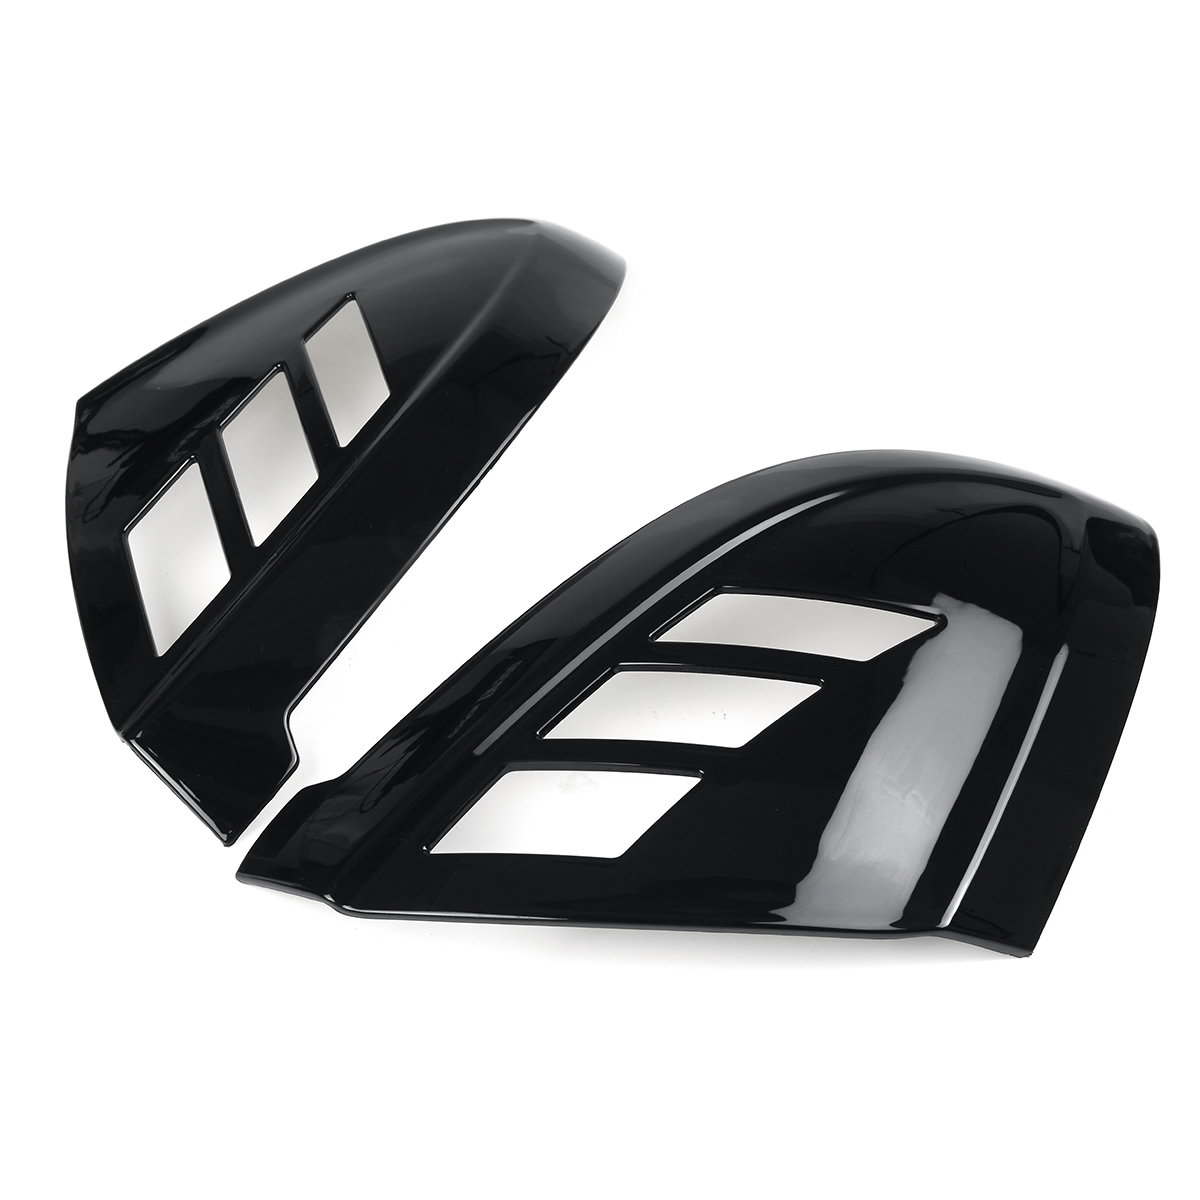 1 Pair Glossy Black Rear View Mirror Cap Cover Add on Case Side Mirror Car Modification for AUDI A4 S4 RS4 A5 S5 RS5 All Models 2017-2020 - Auto GoShop